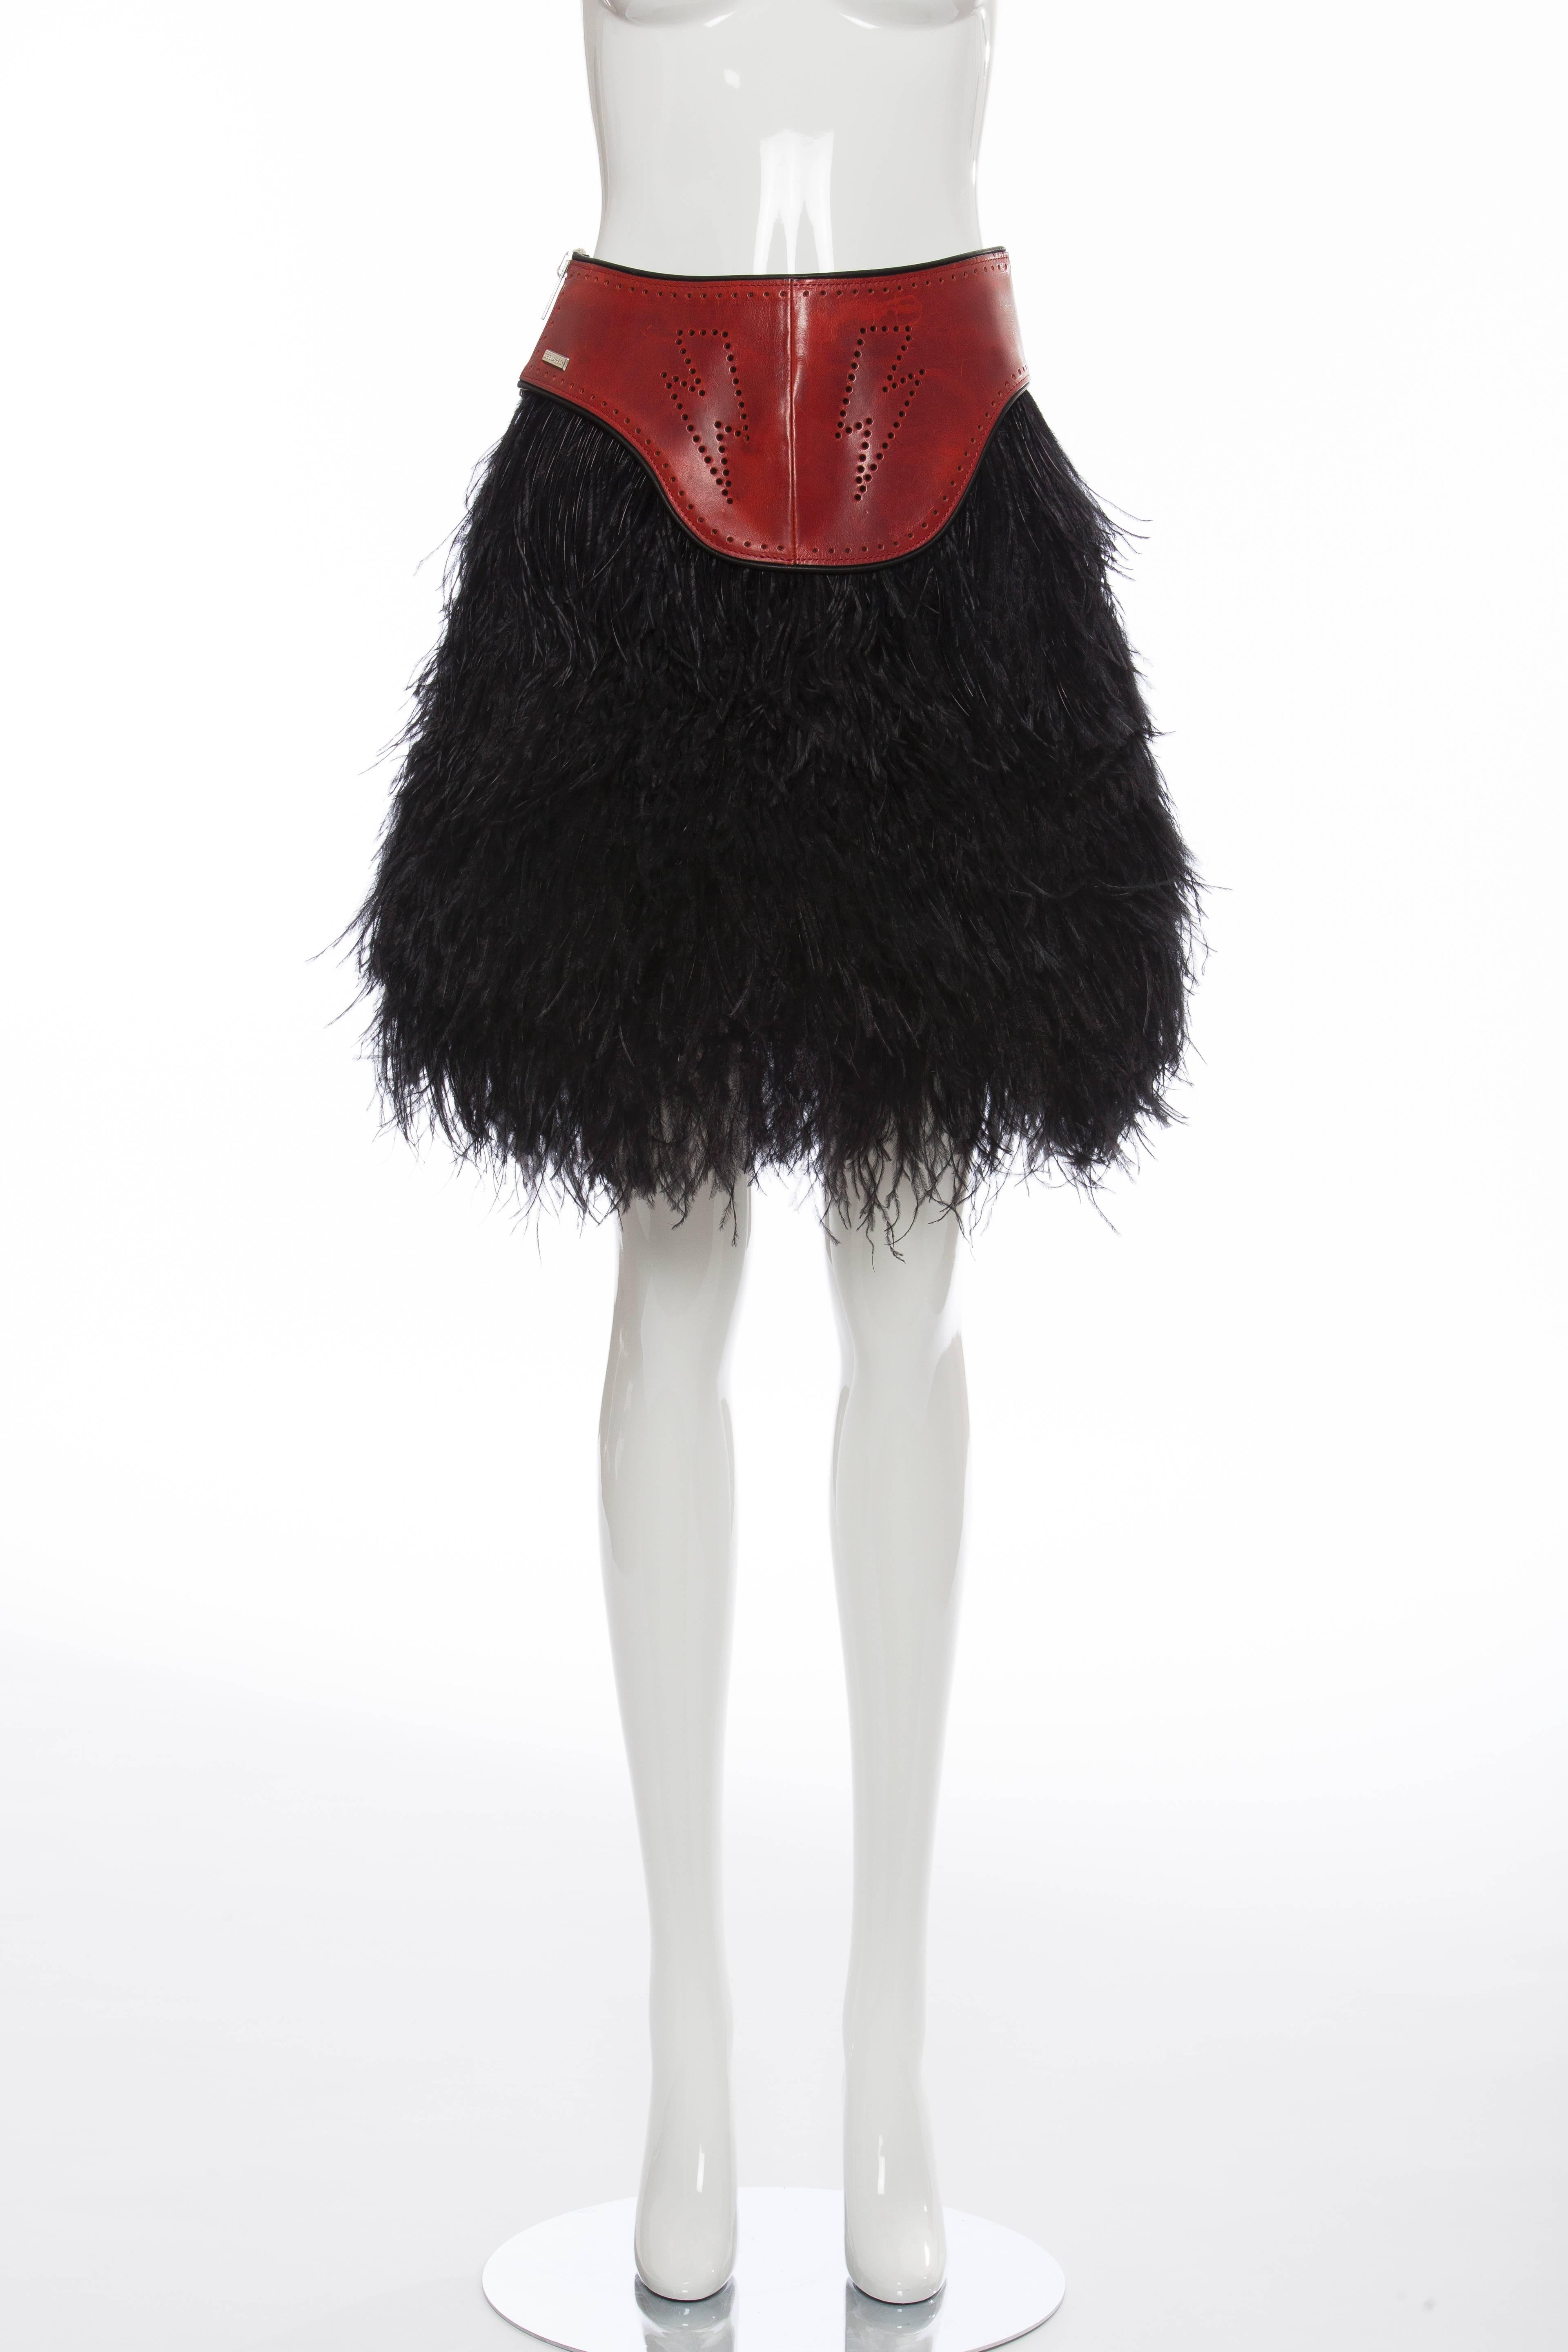 Dsquared², Fall 2008 ostrich feather skirt with red leather panel at waist featuring perforated trim and exposed silver-tone zip closure at side seam.

IT. 40
US. 4

Waist 26”, Hip 36”, Length 19